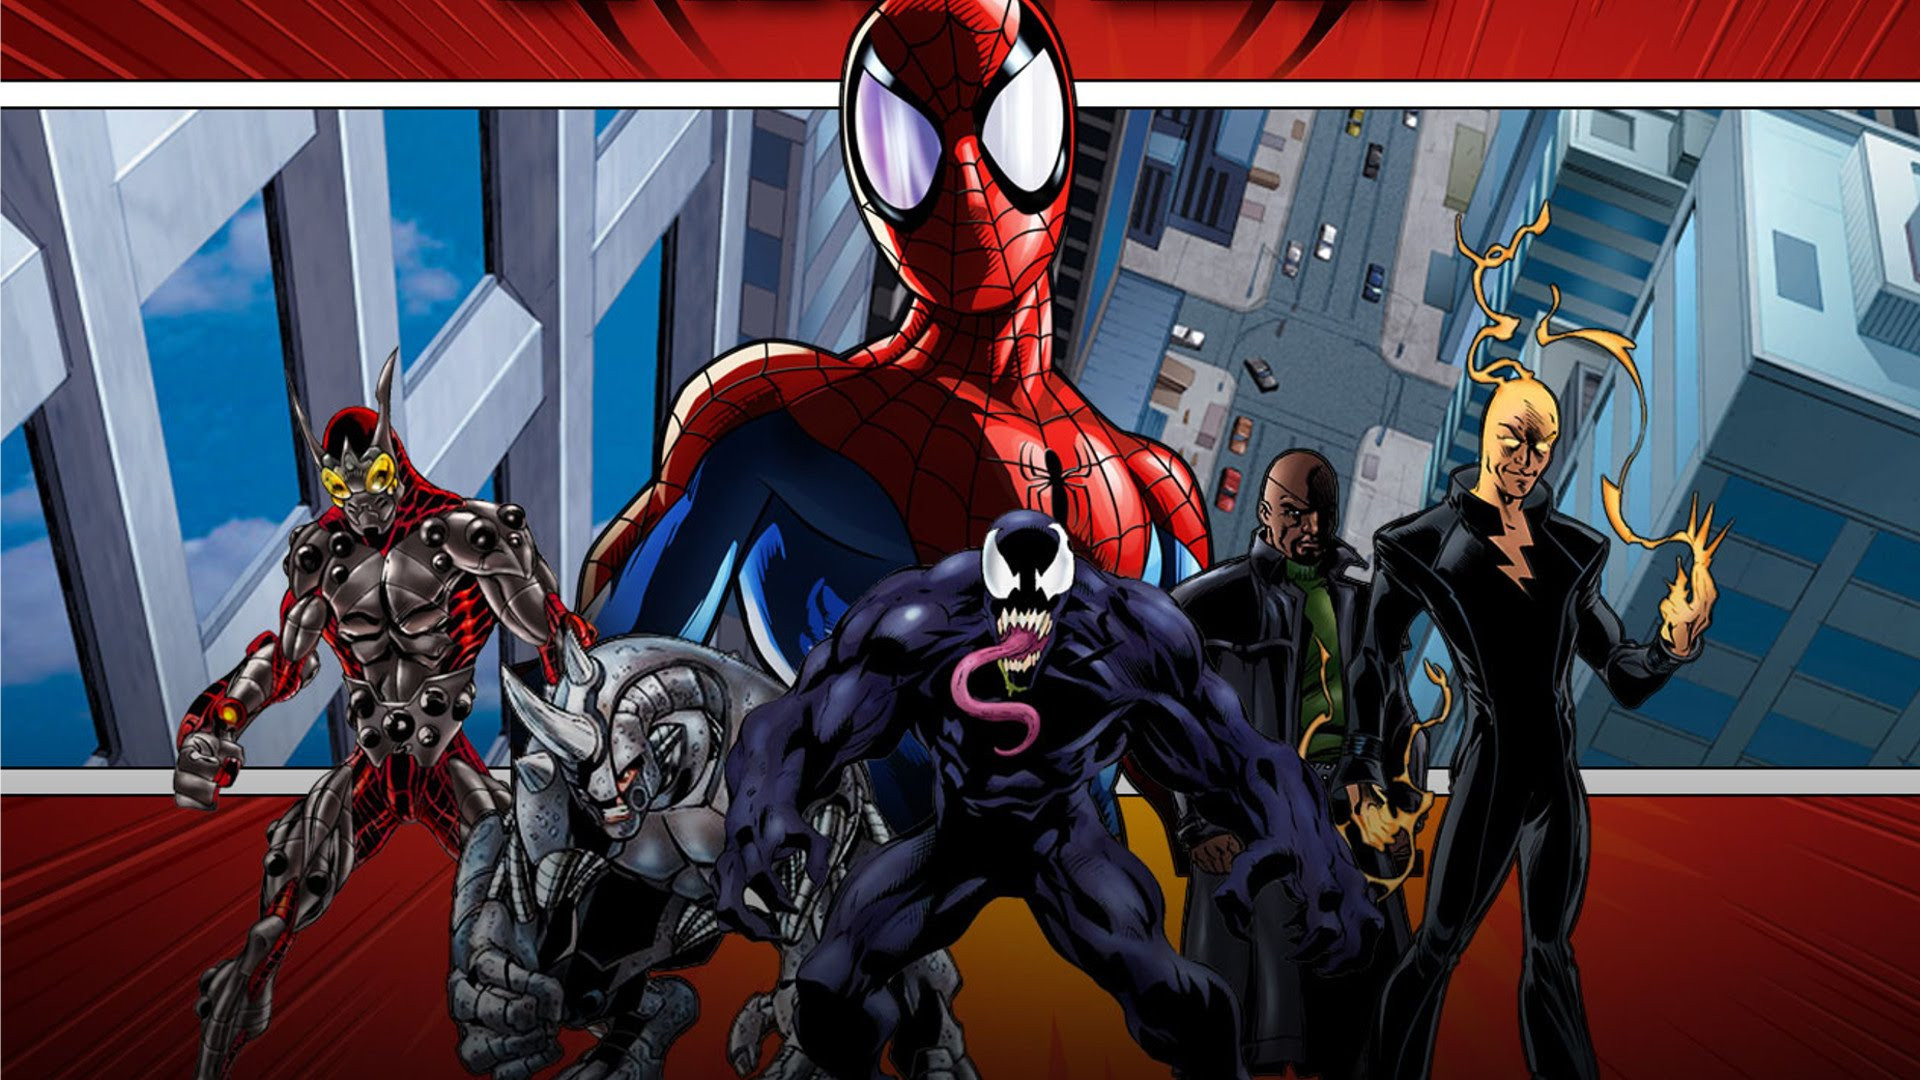 old video game trends - spider-man and other comic book characters